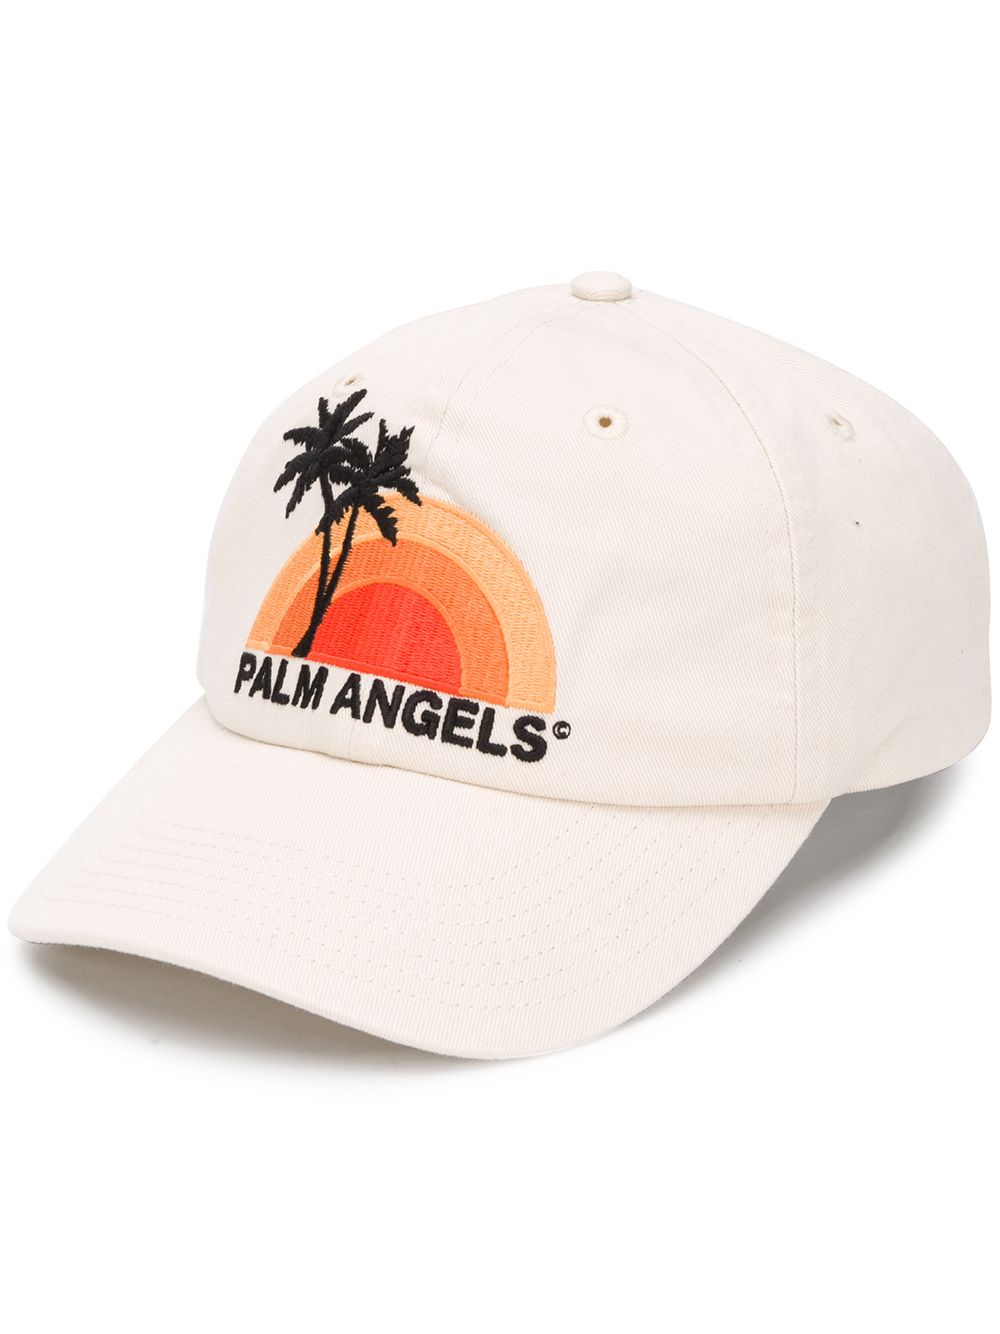 PALM ANGELS logo embroidered cap